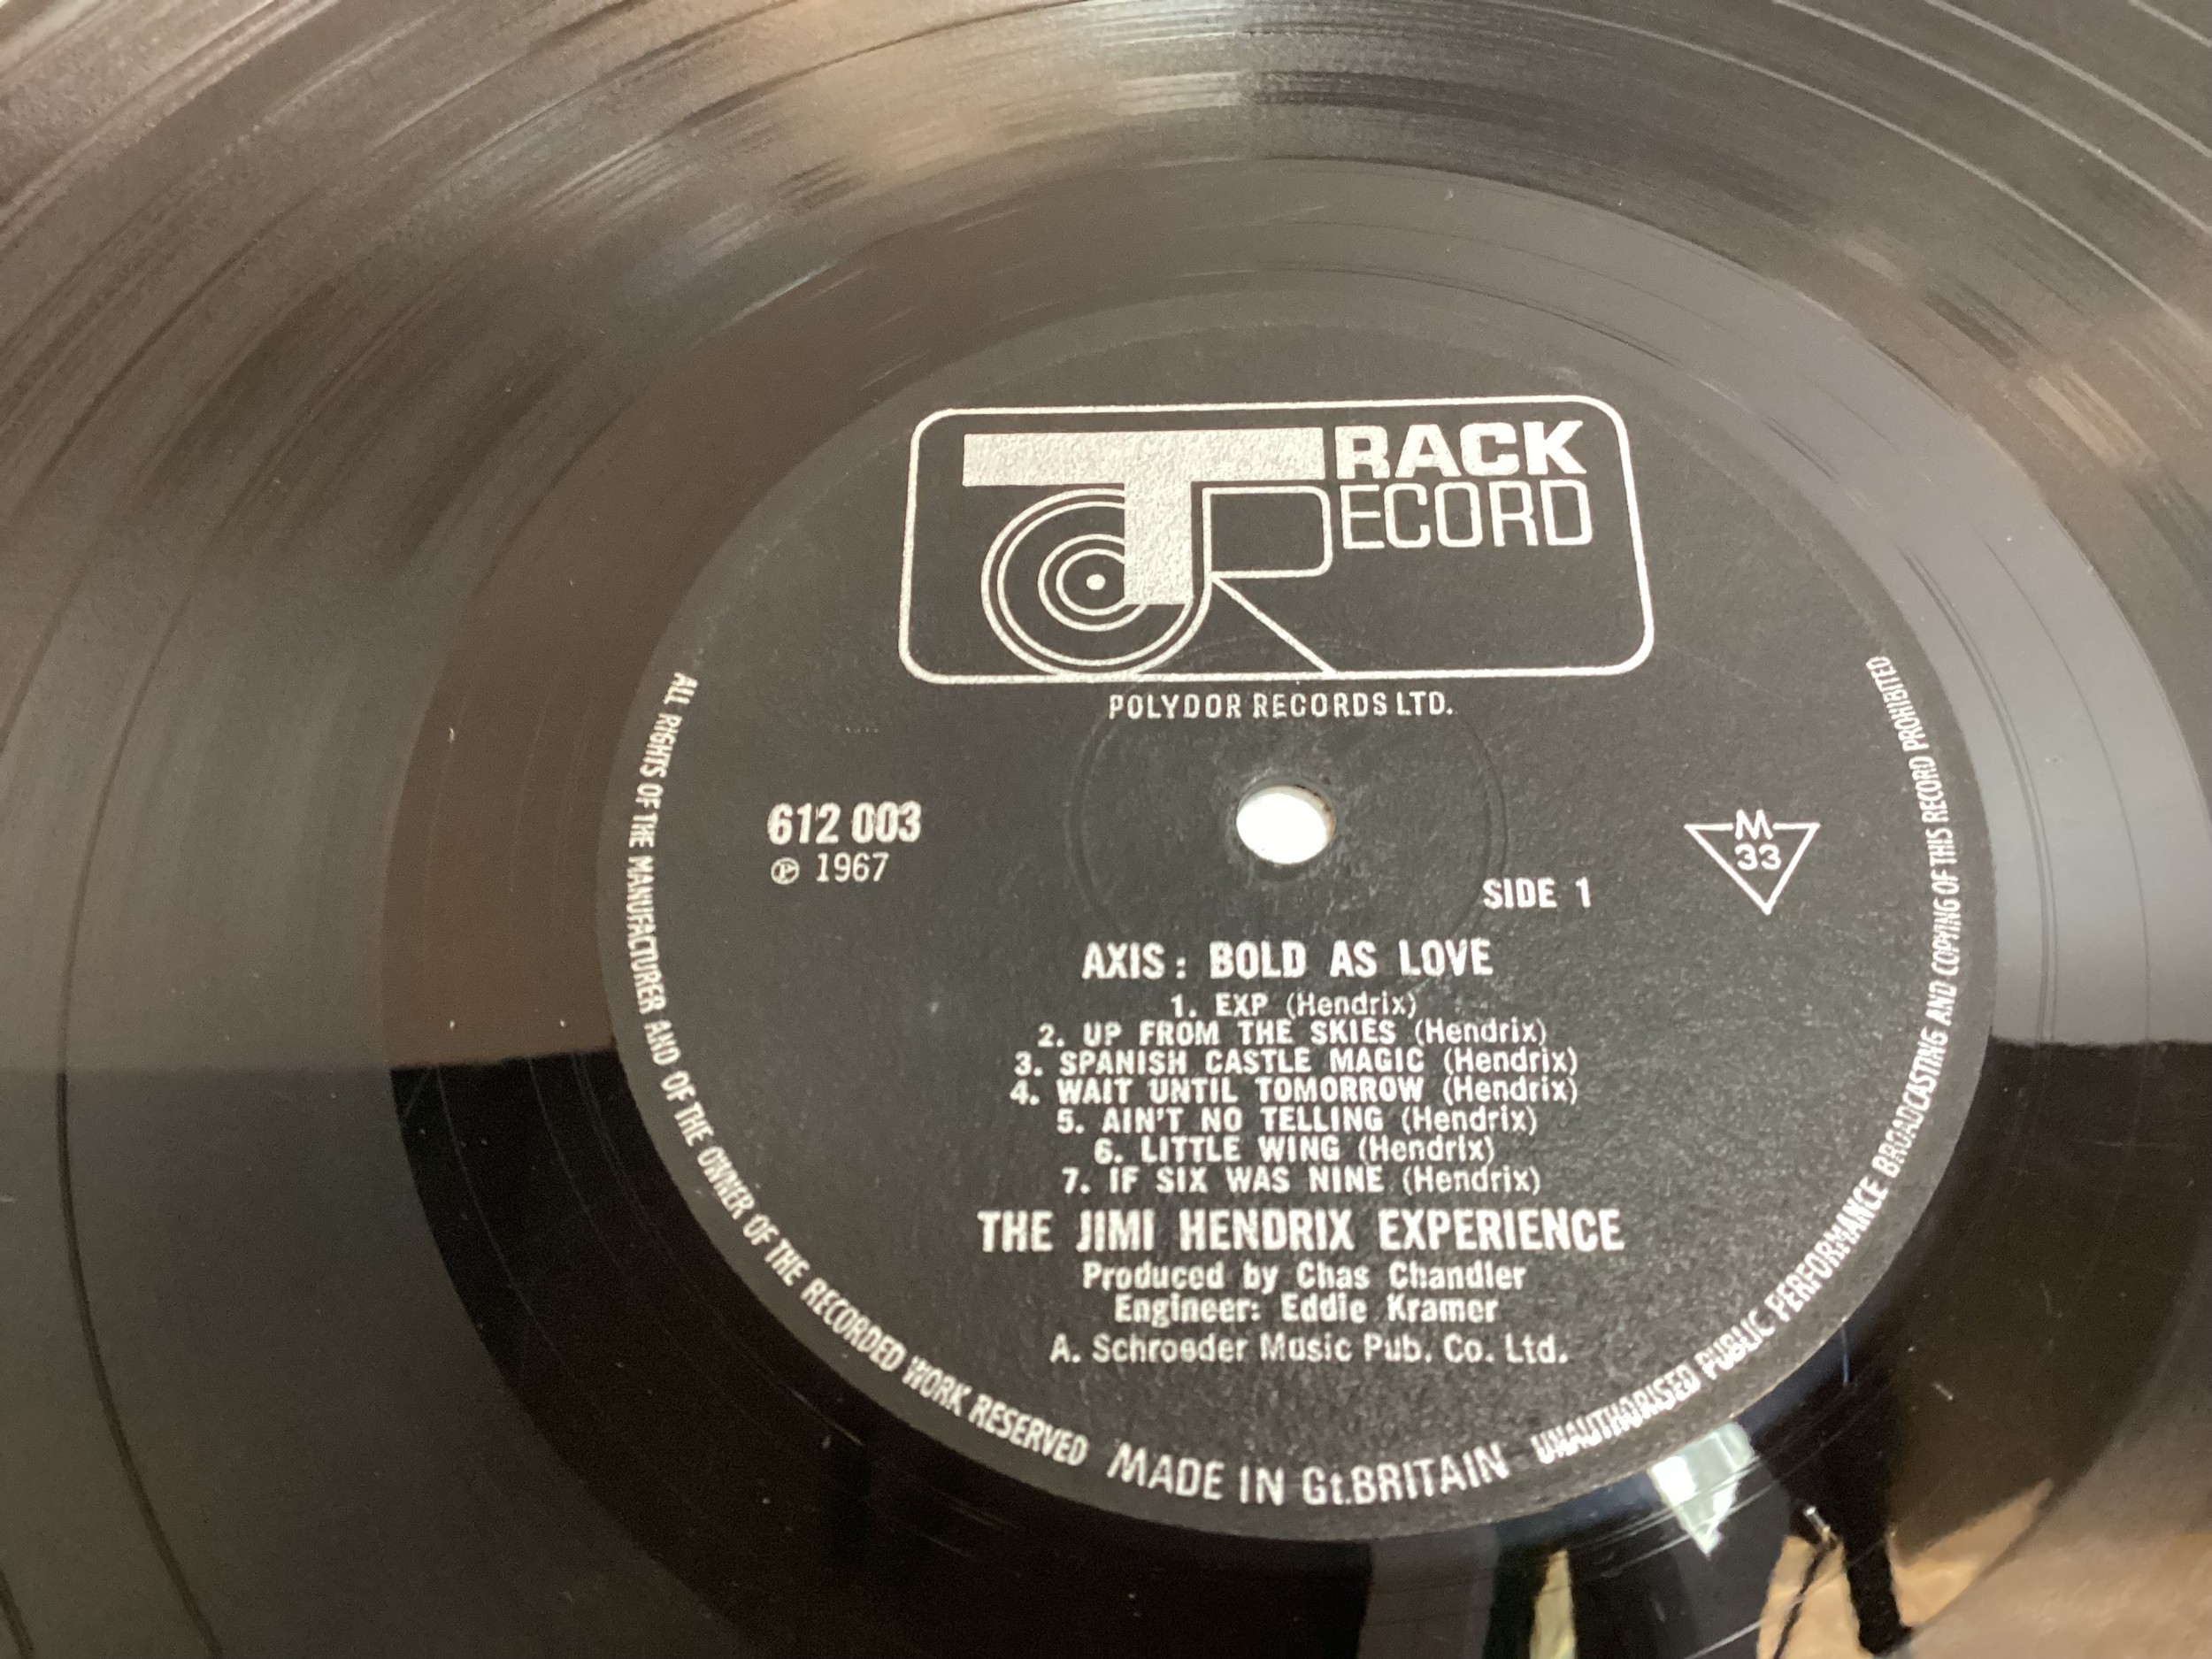 THE JIMI HENDRIX EXPERIENCE ‘AXIS BOLD AS LOVE’ VINYL ALBUM. This original Track label 612003 was - Image 4 of 6